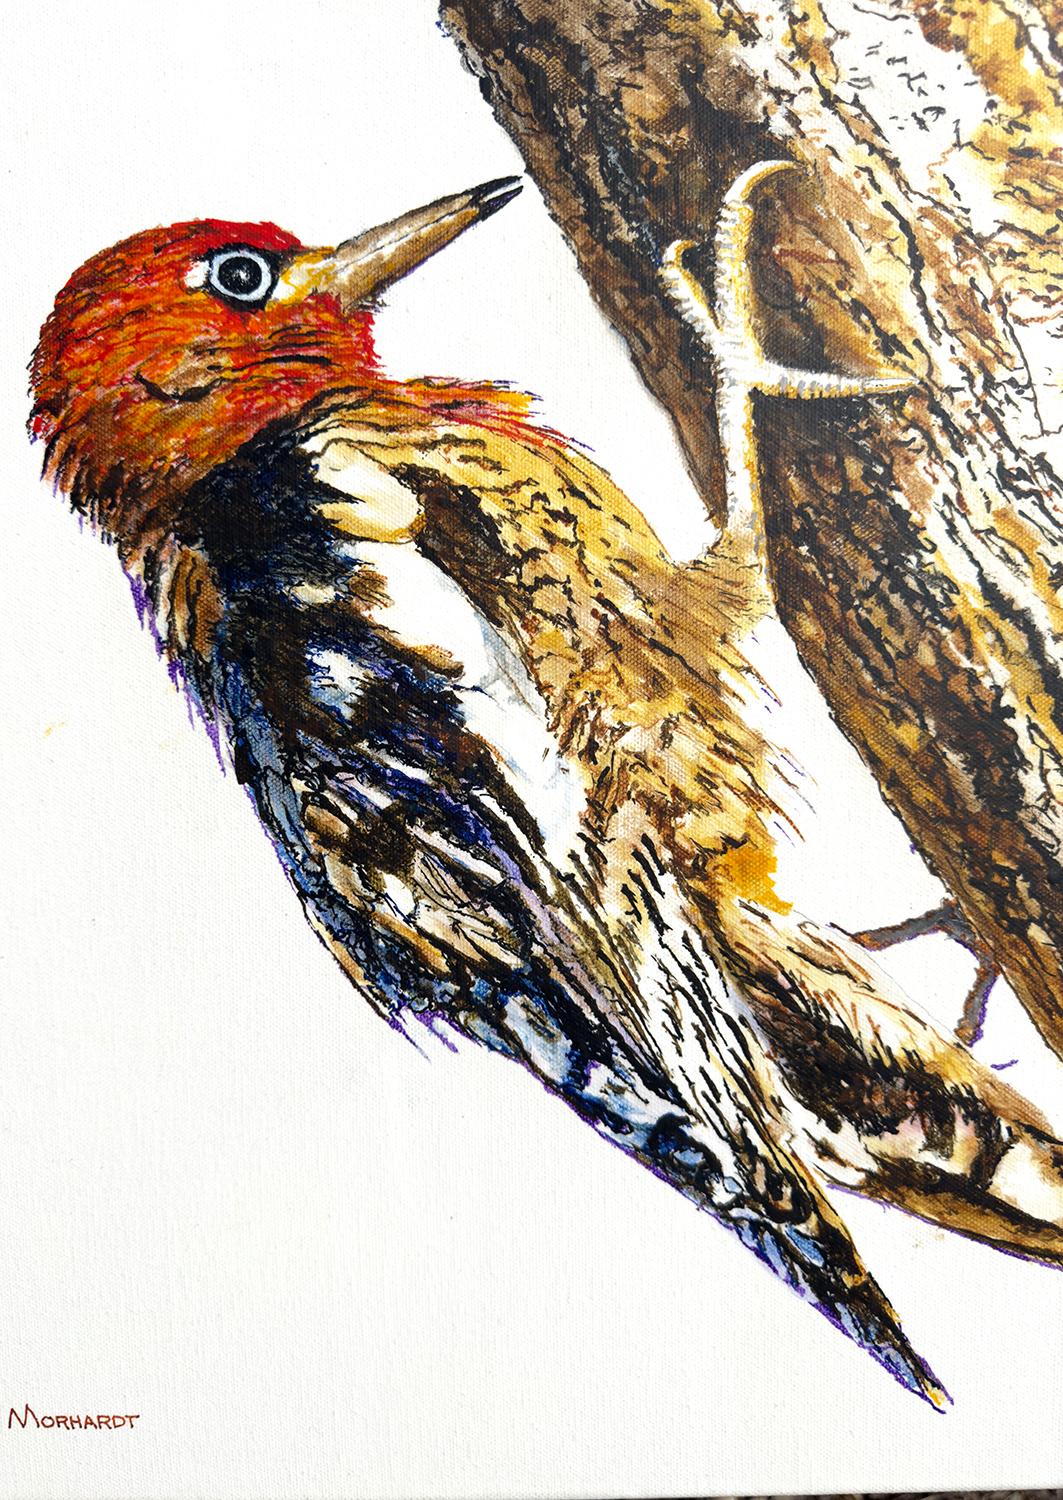 <p>Artist Comments<br>A pair of little woodpeckers perch on opposite sides of a branch, busy probing the small holes they've made for fresh tree sap. The intricate features of their plumage and the textured bark create a striking contrast against